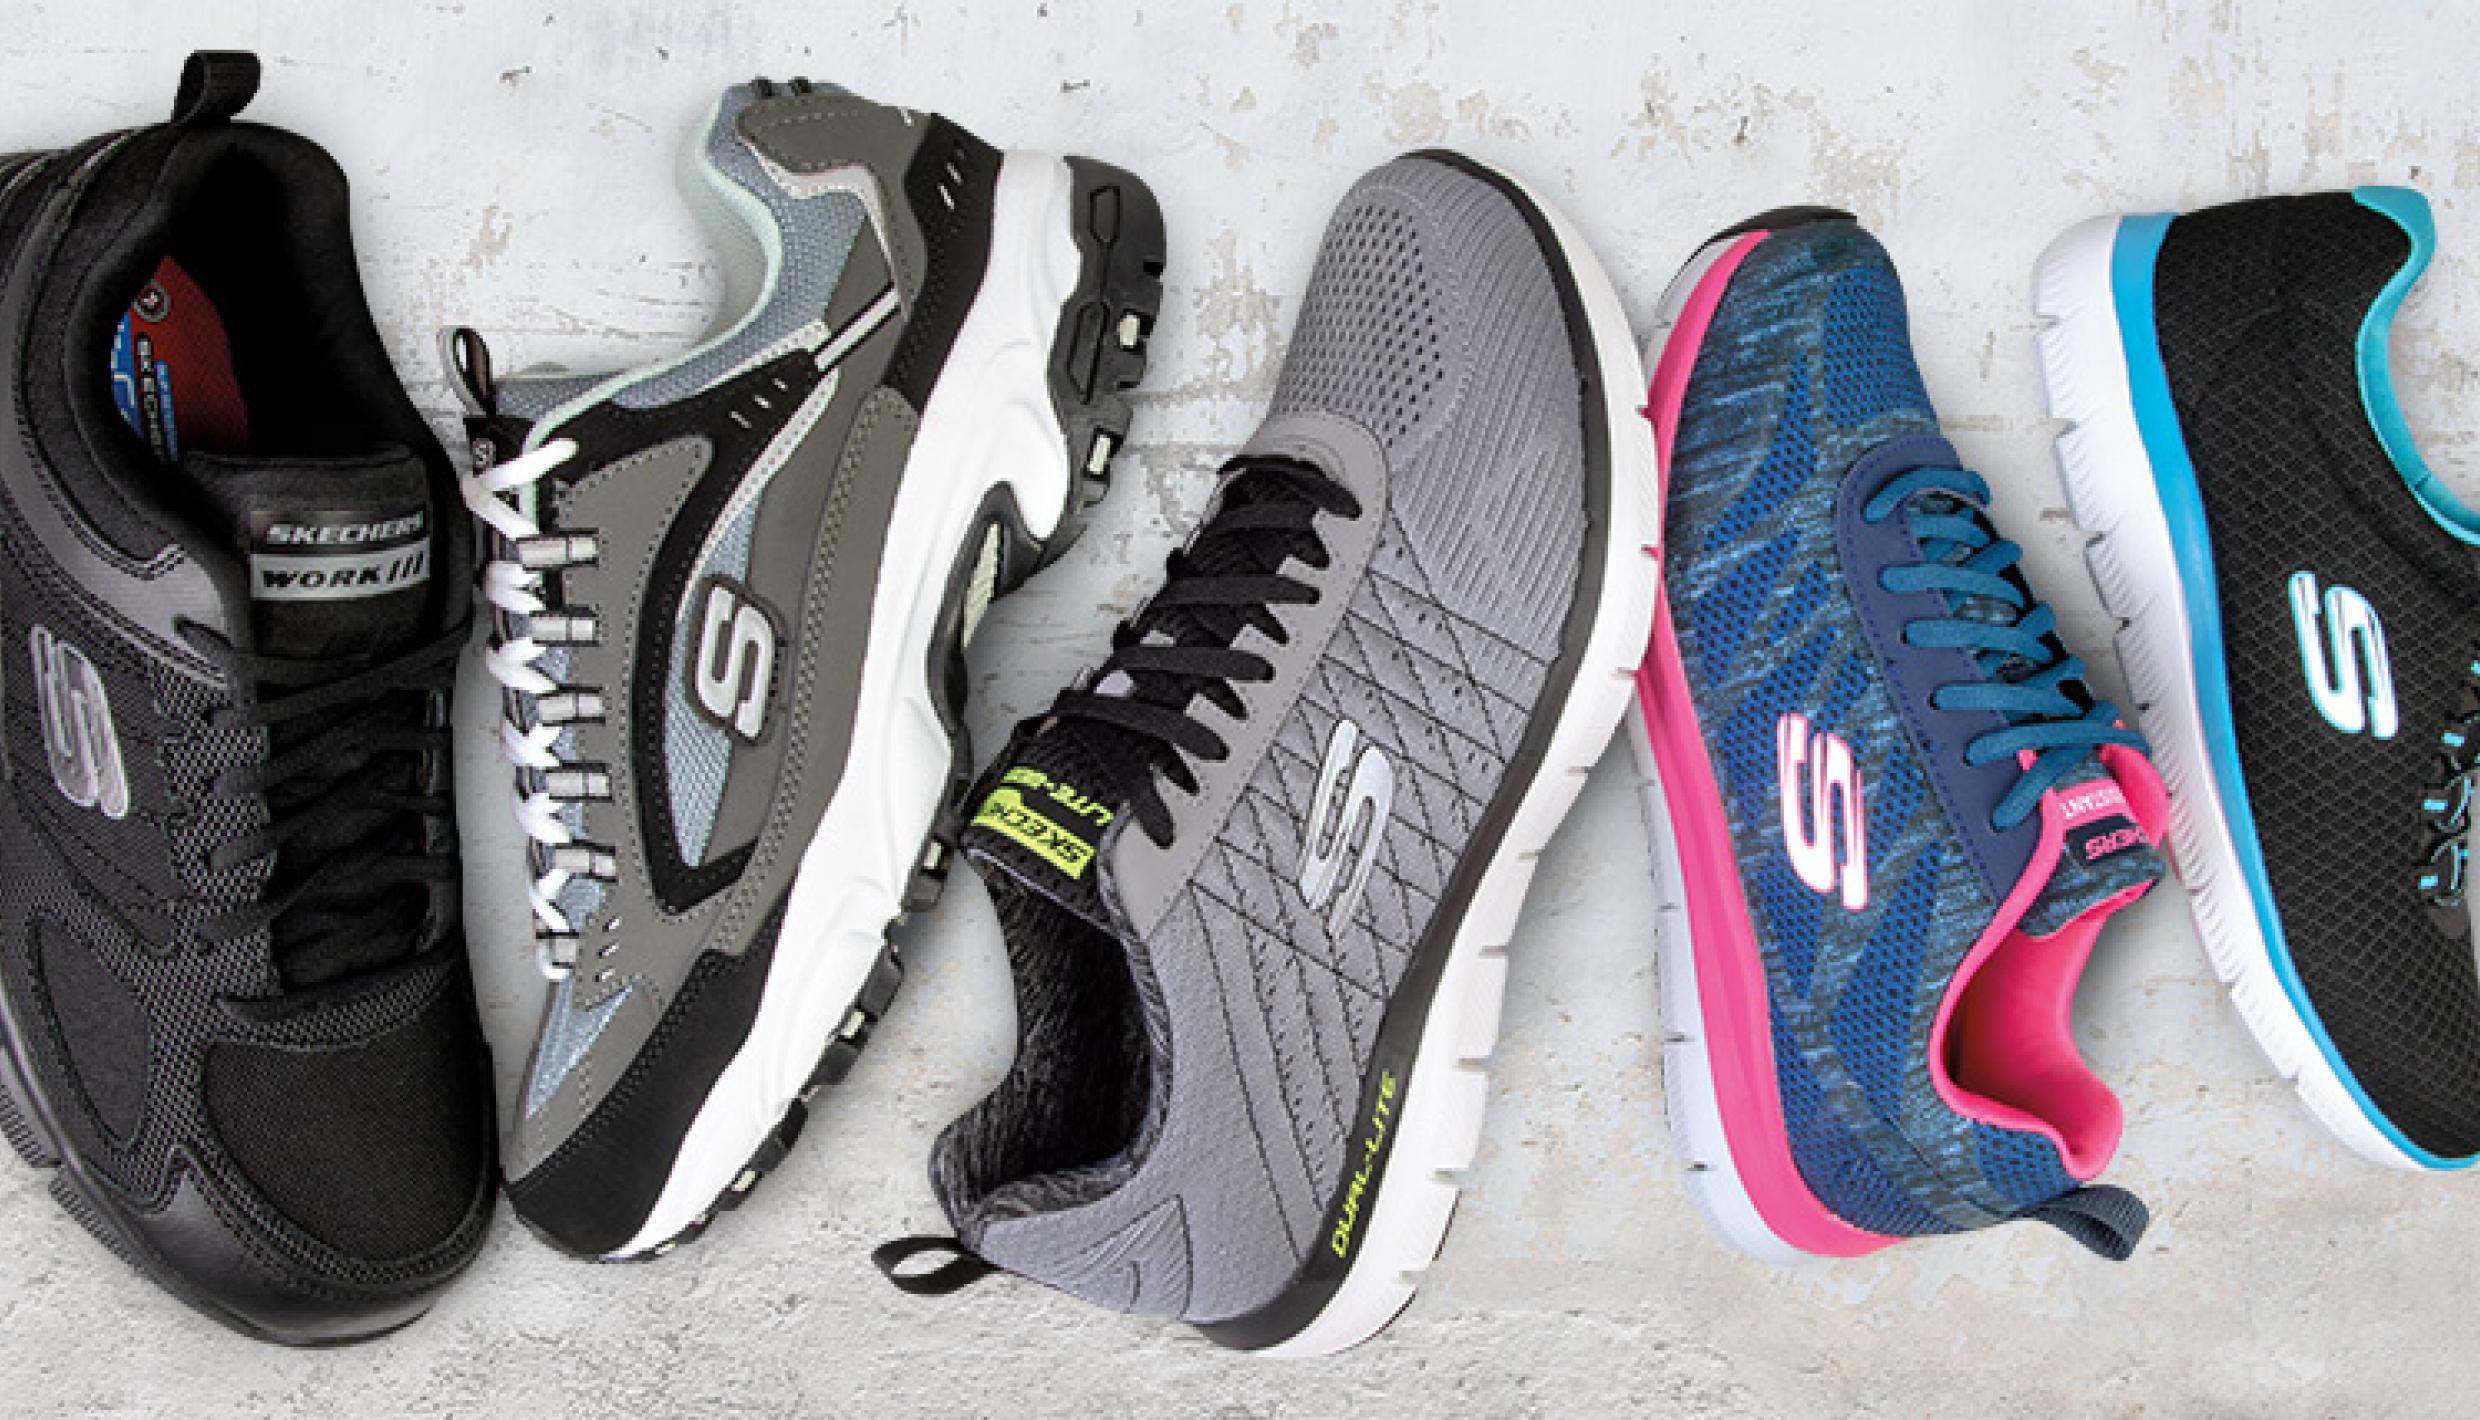 skechers shoes for sale near me